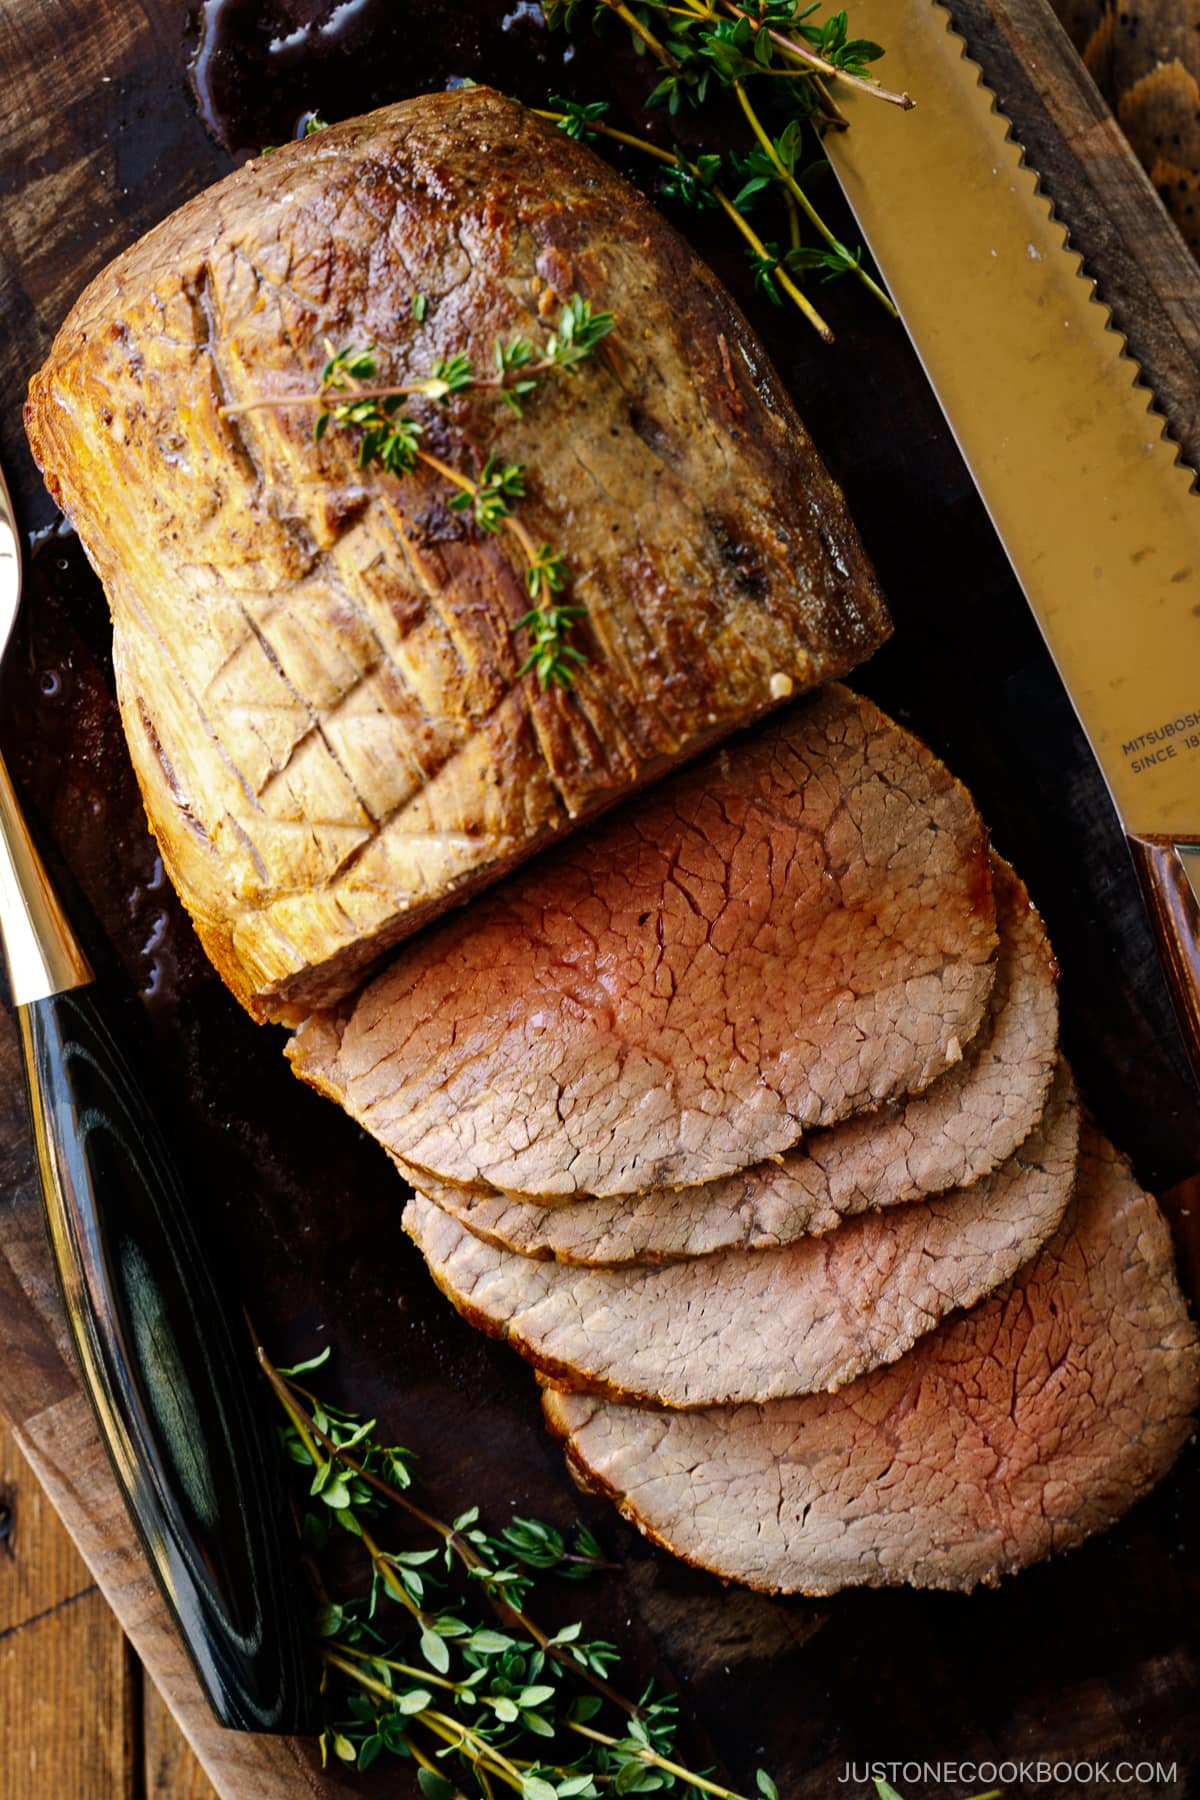 A roast beef being thinly sliced on the wooden cutting board garnished with thyme.